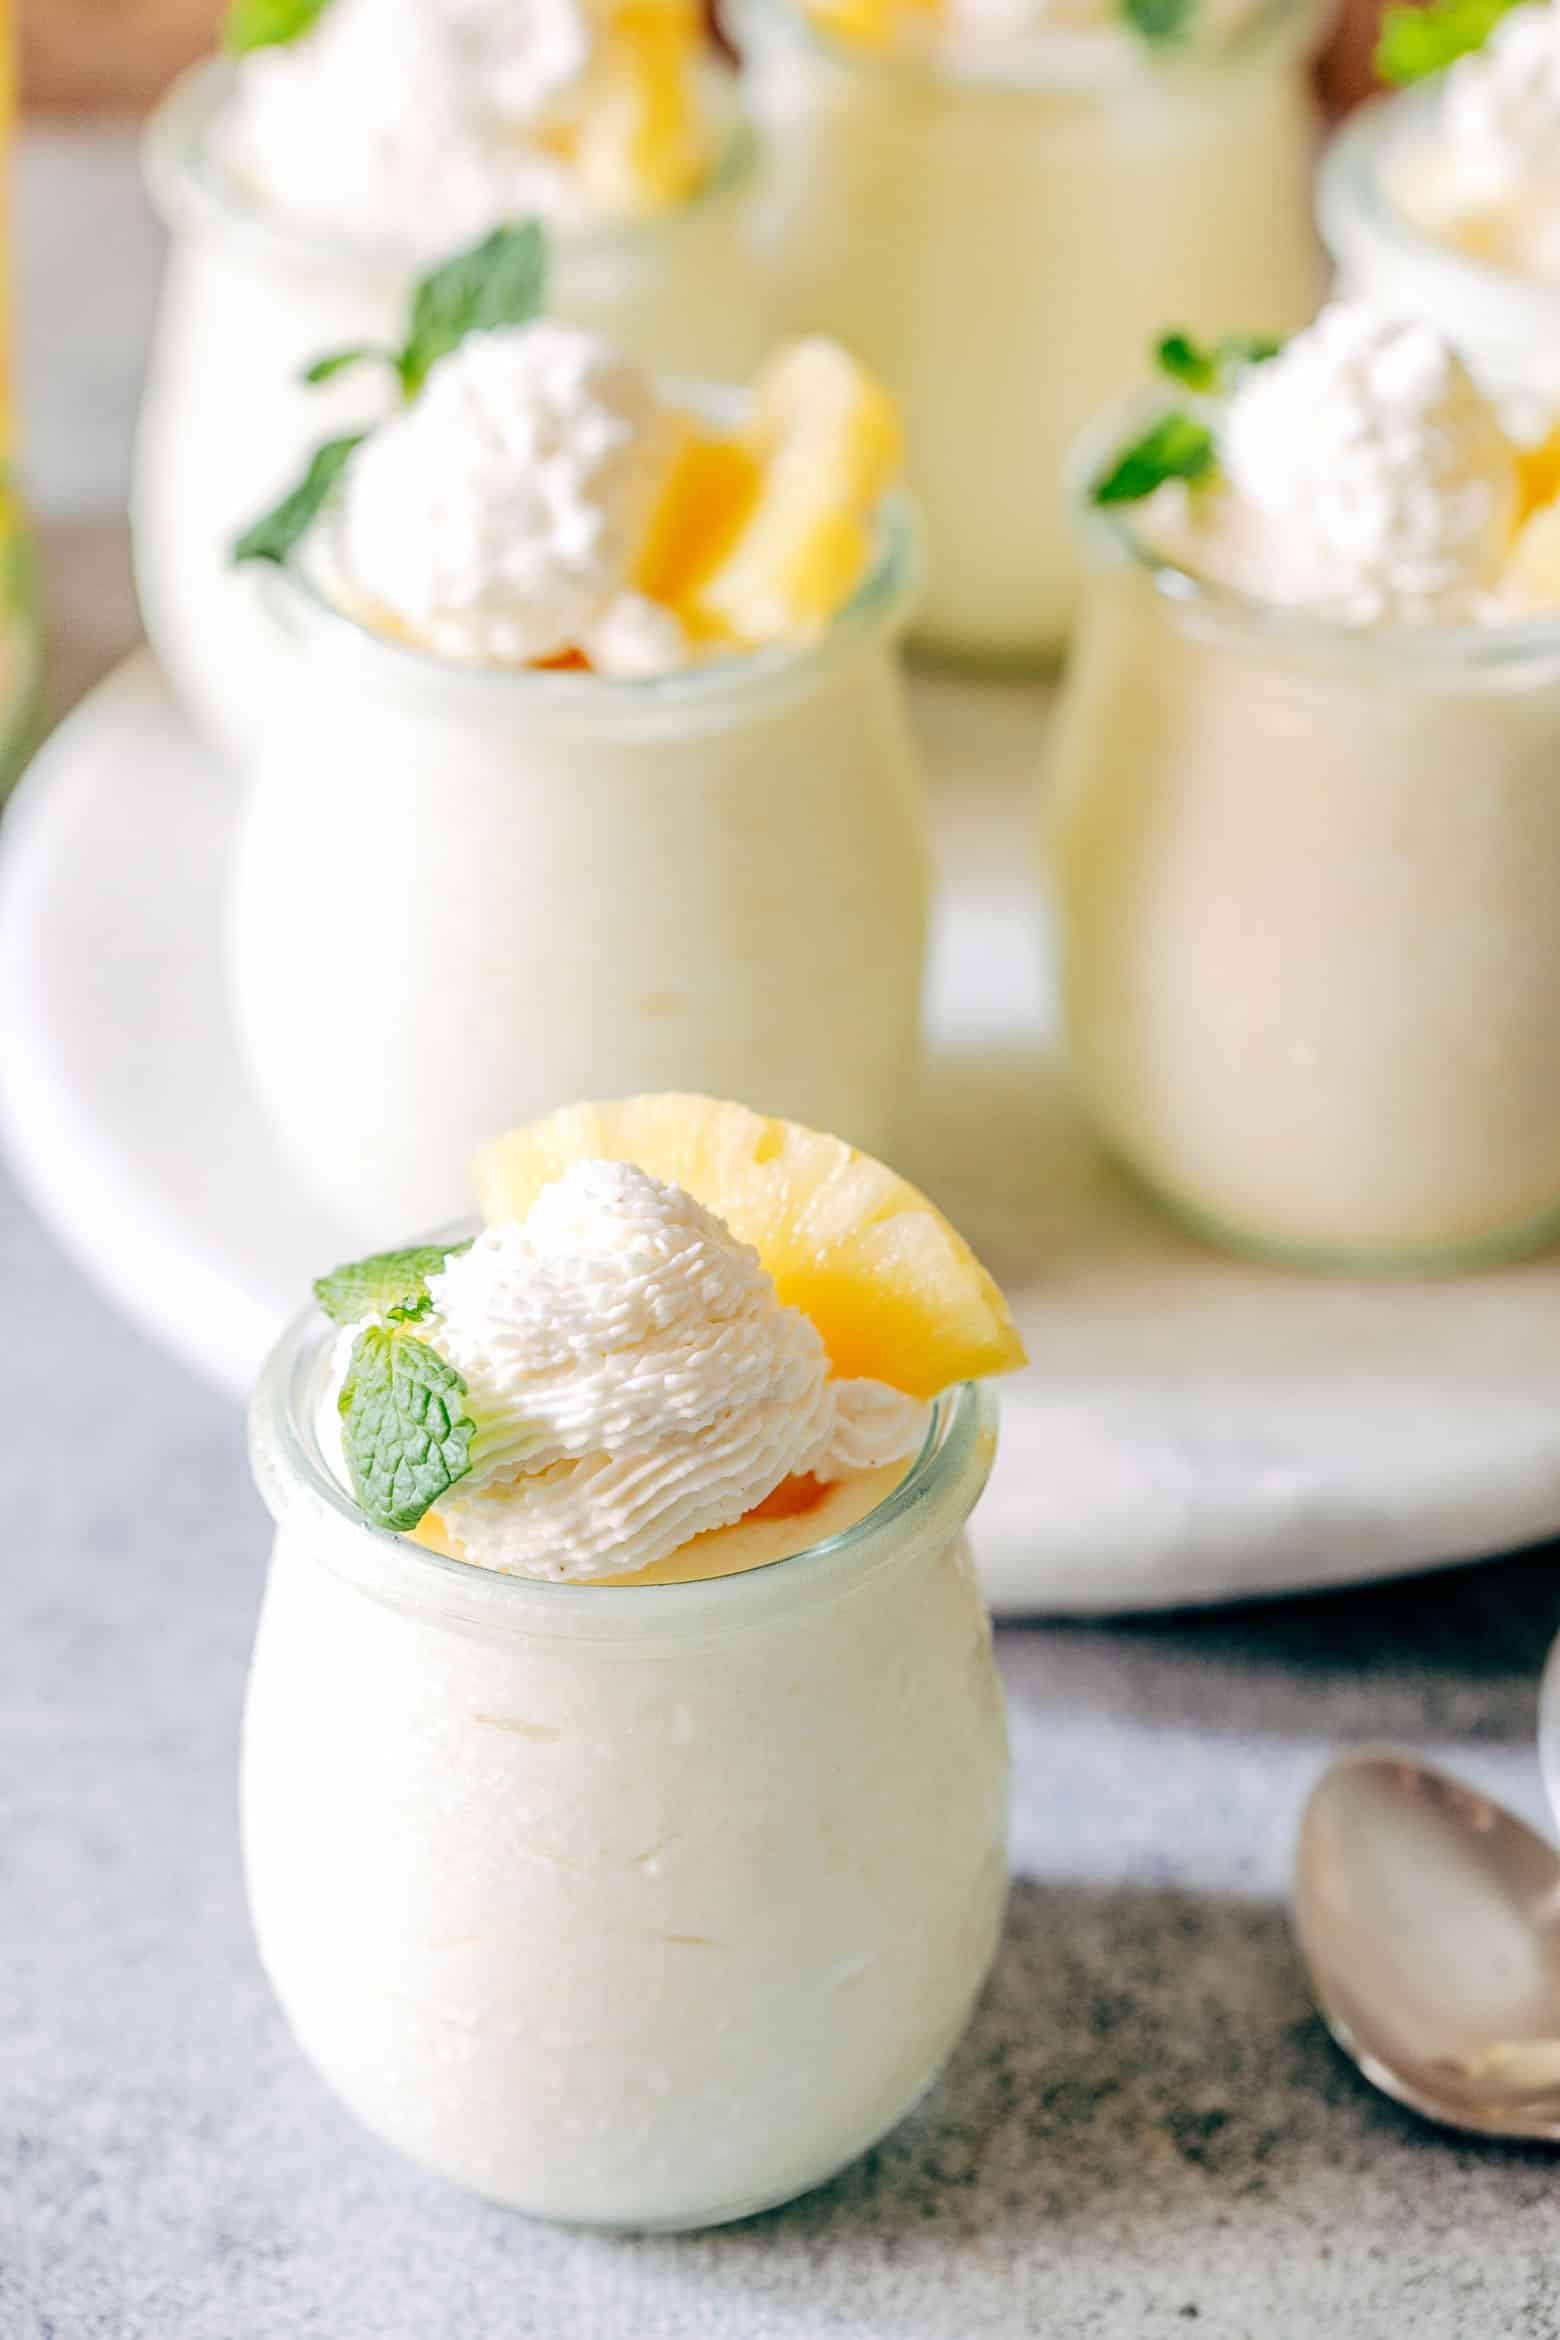 Easy eggless pineapple mousse is a delicious, make ahead dessert that will be a crowd pleaser! With minimum prep, these pineapple mousse cups are ready in minutes and have a gorgeous creamy texture.